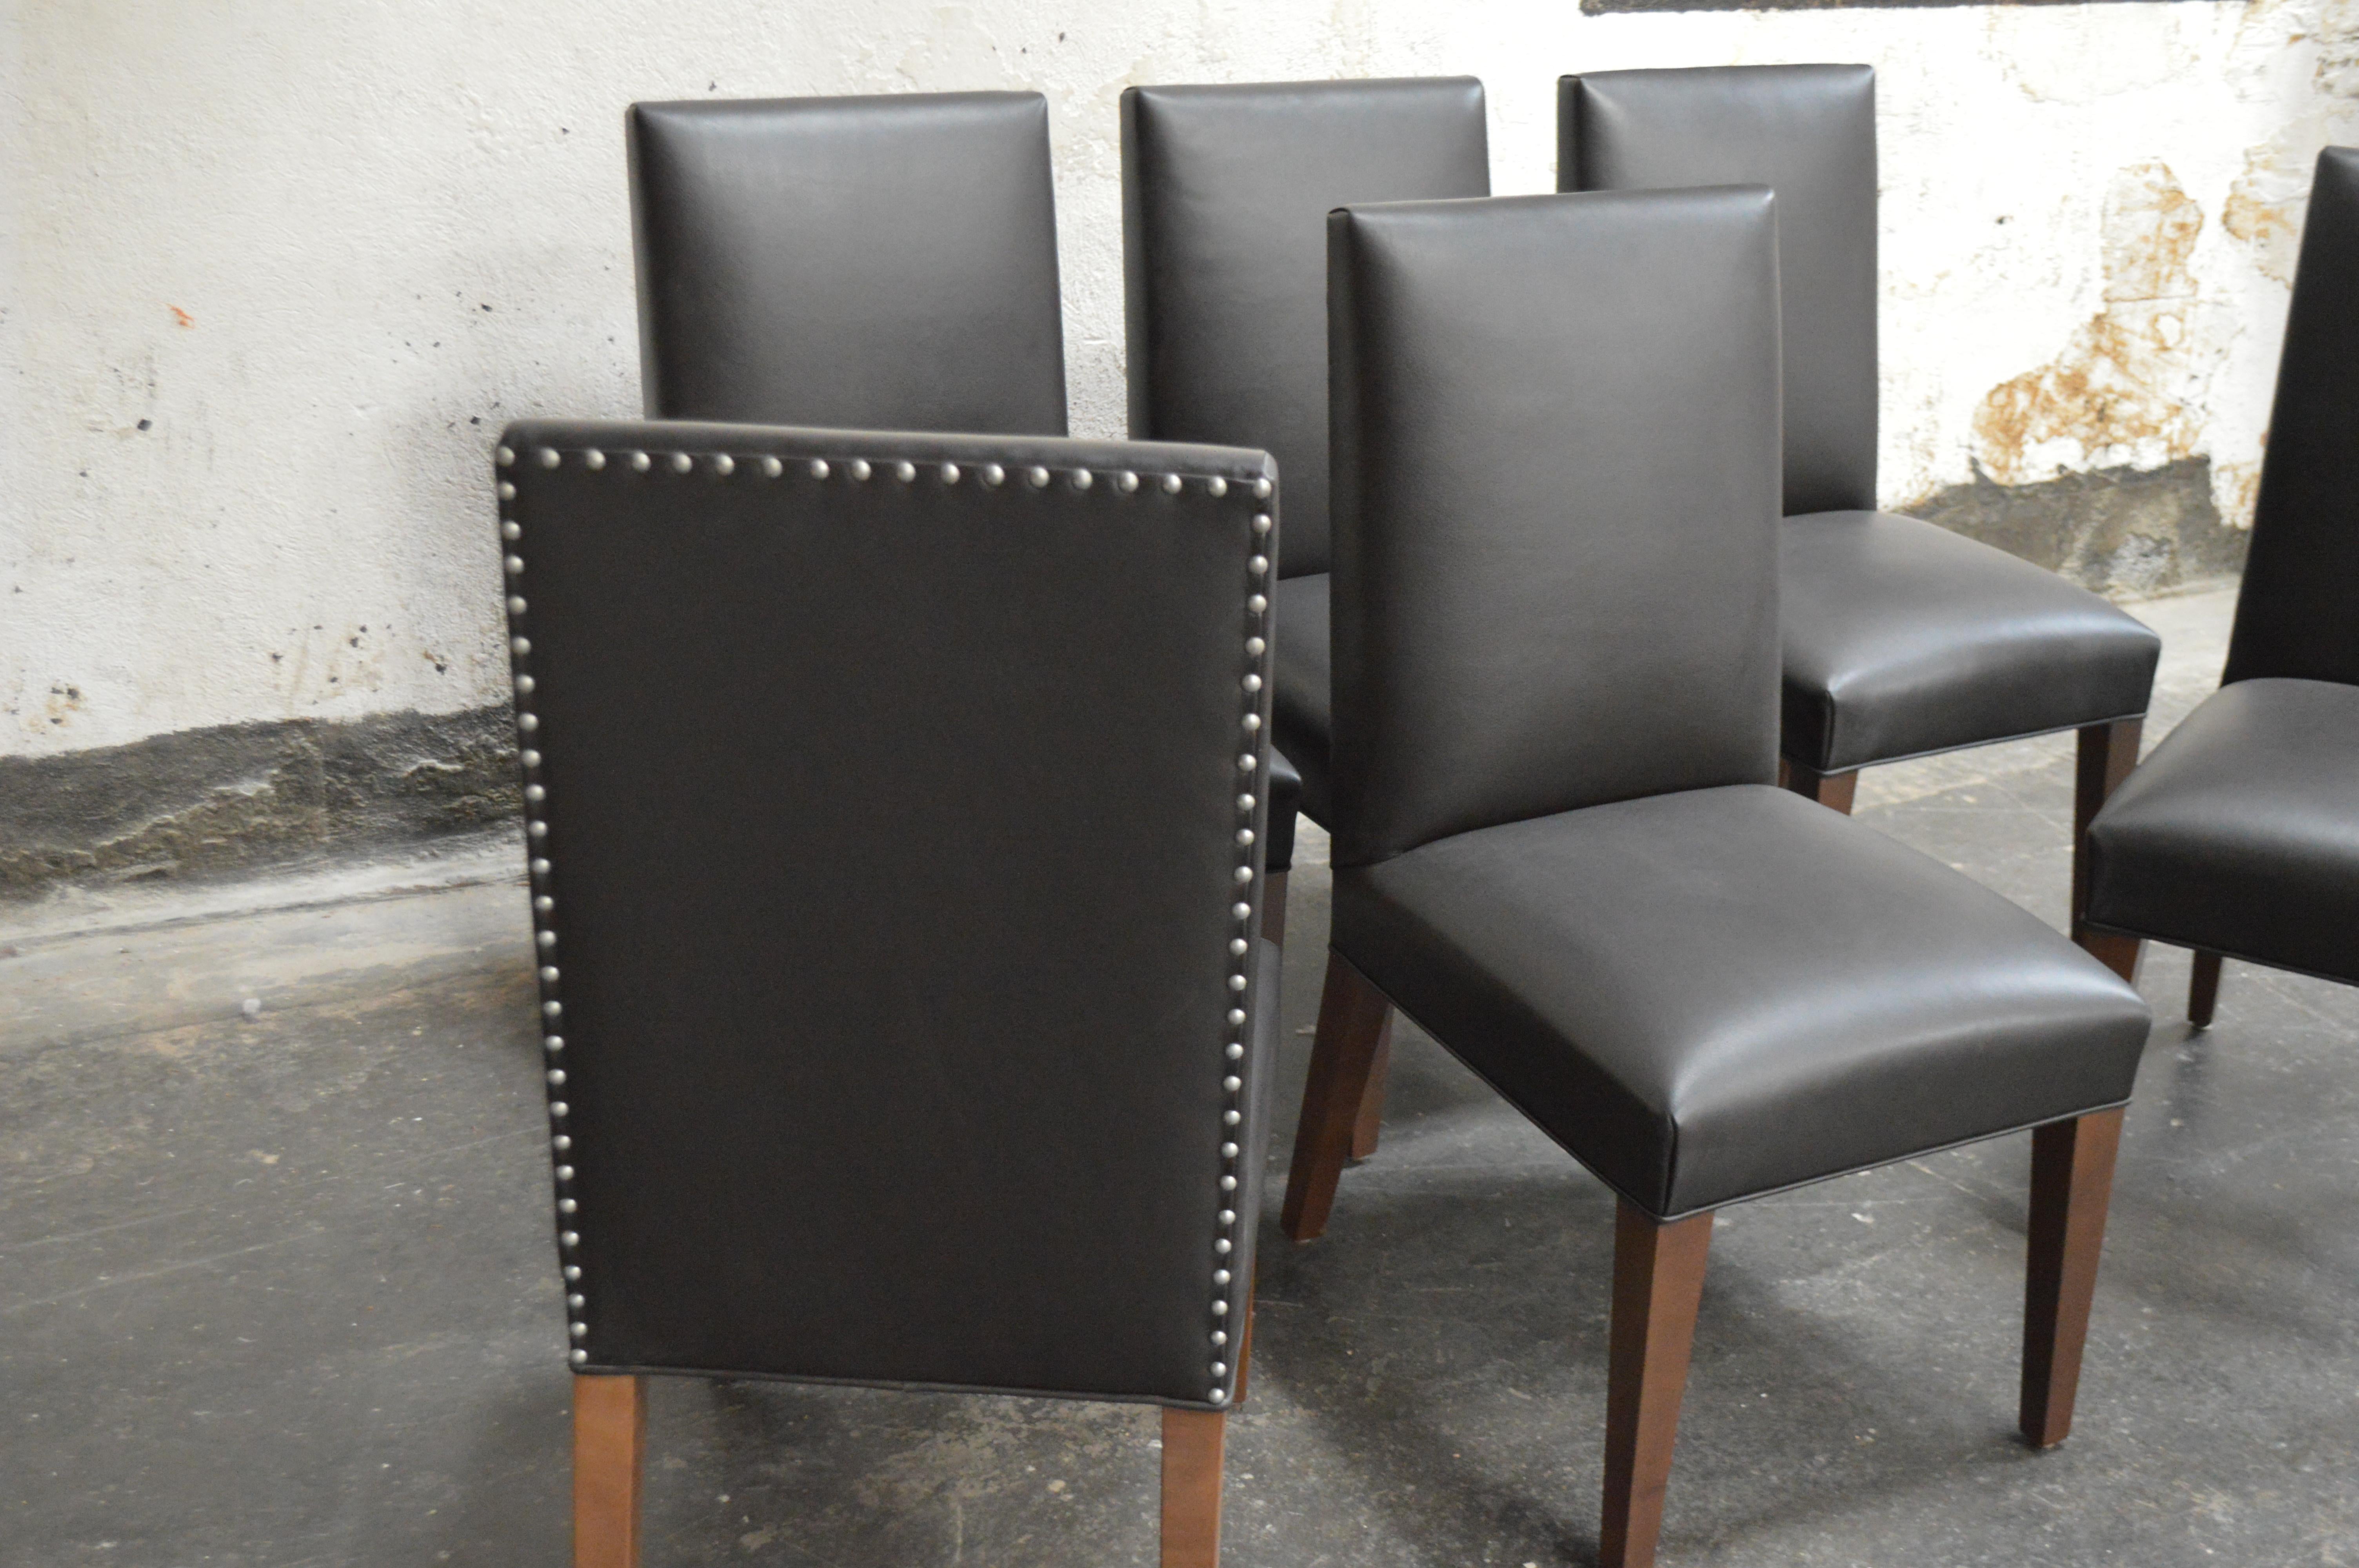 These custom Bjork Studio Vaughn dining chairs are ready for a dinner party. High end top grain chocolate brown leather and detailed with spaced zinc nail-heads along the outside back.
Details
Dimensions 20